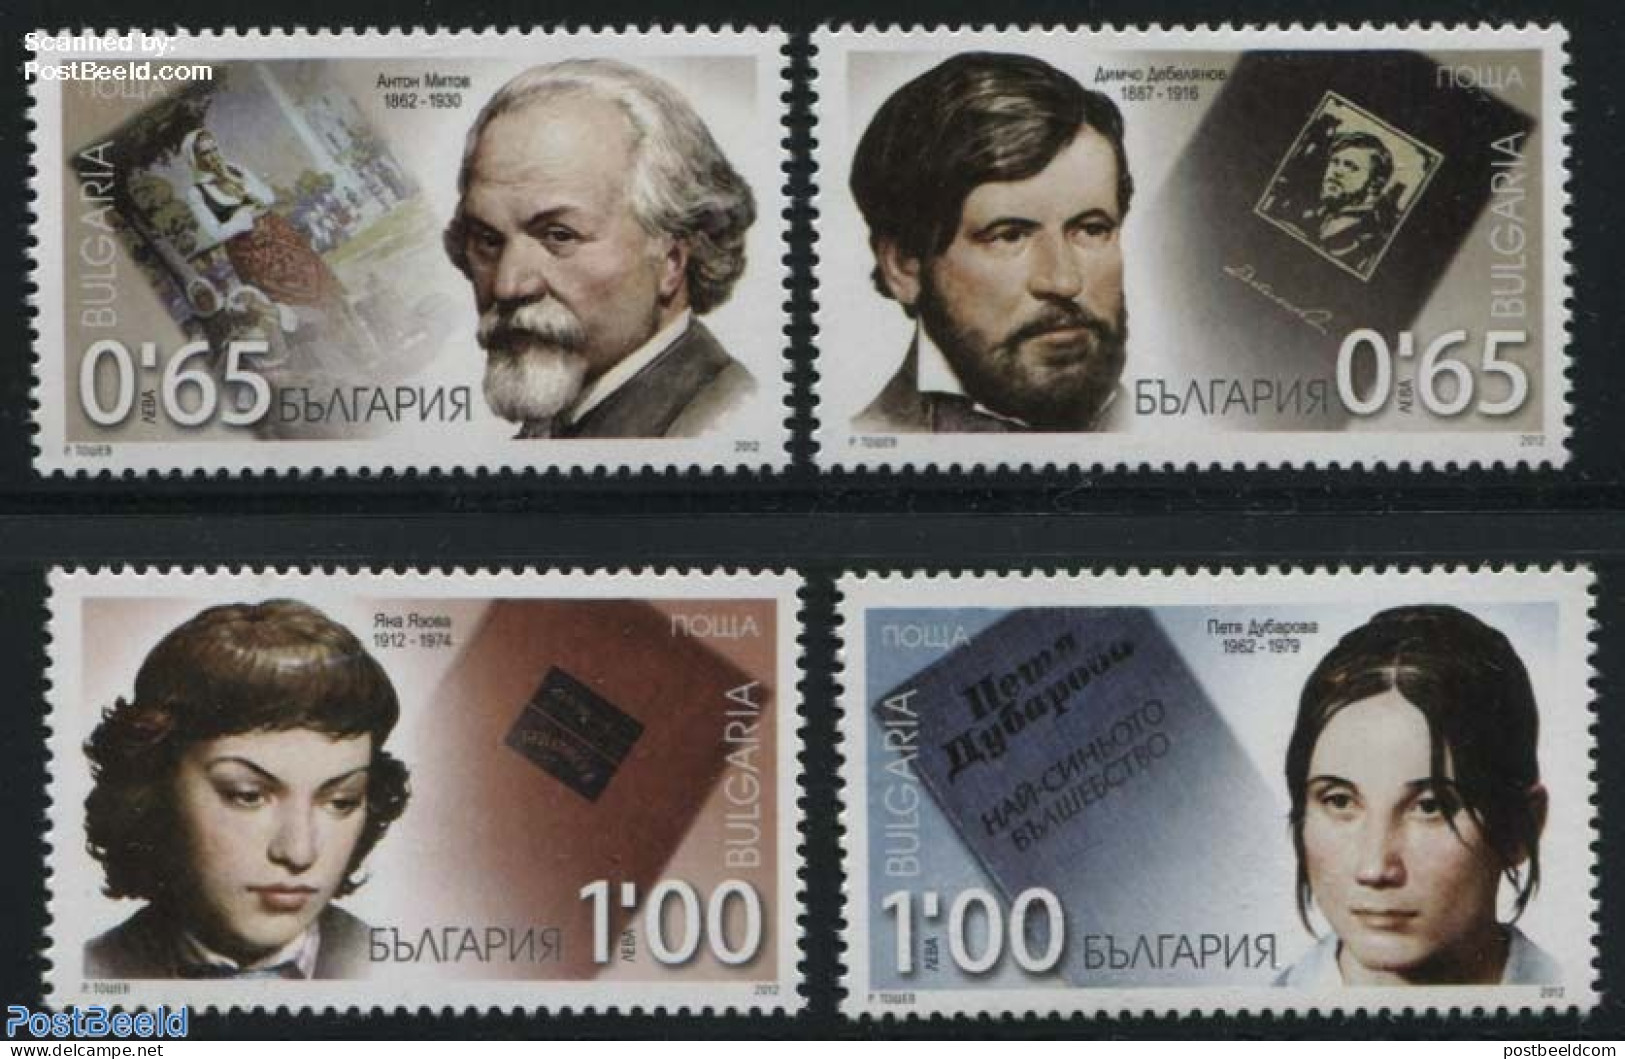 Bulgaria 2012 Famous Persons 4v, Mint NH, Art - Authors - Unused Stamps